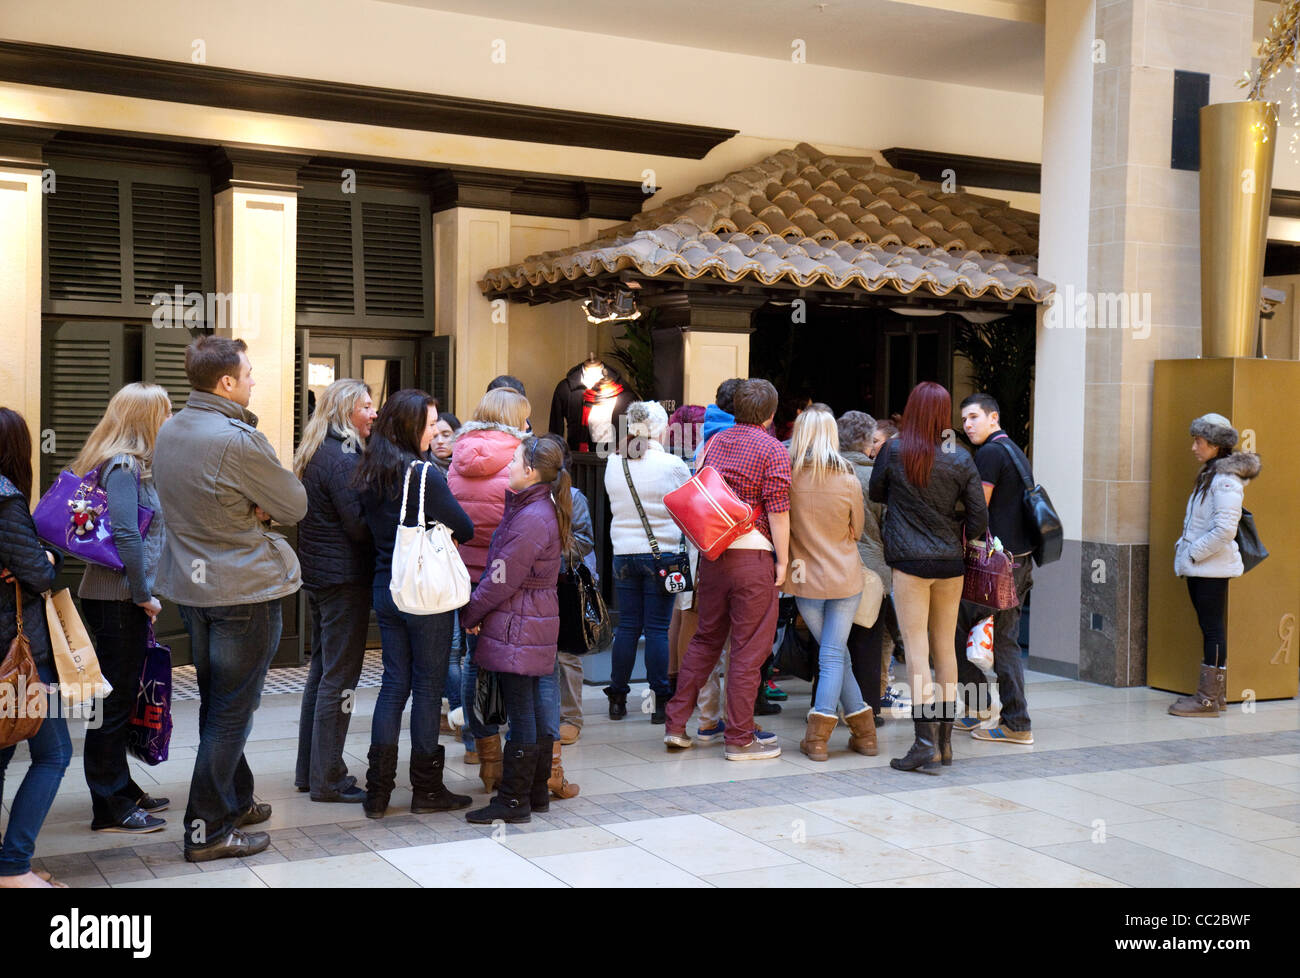 People queuing outside Hollister fashion store, the Grand Arcade Cambridge UK Stock Photo